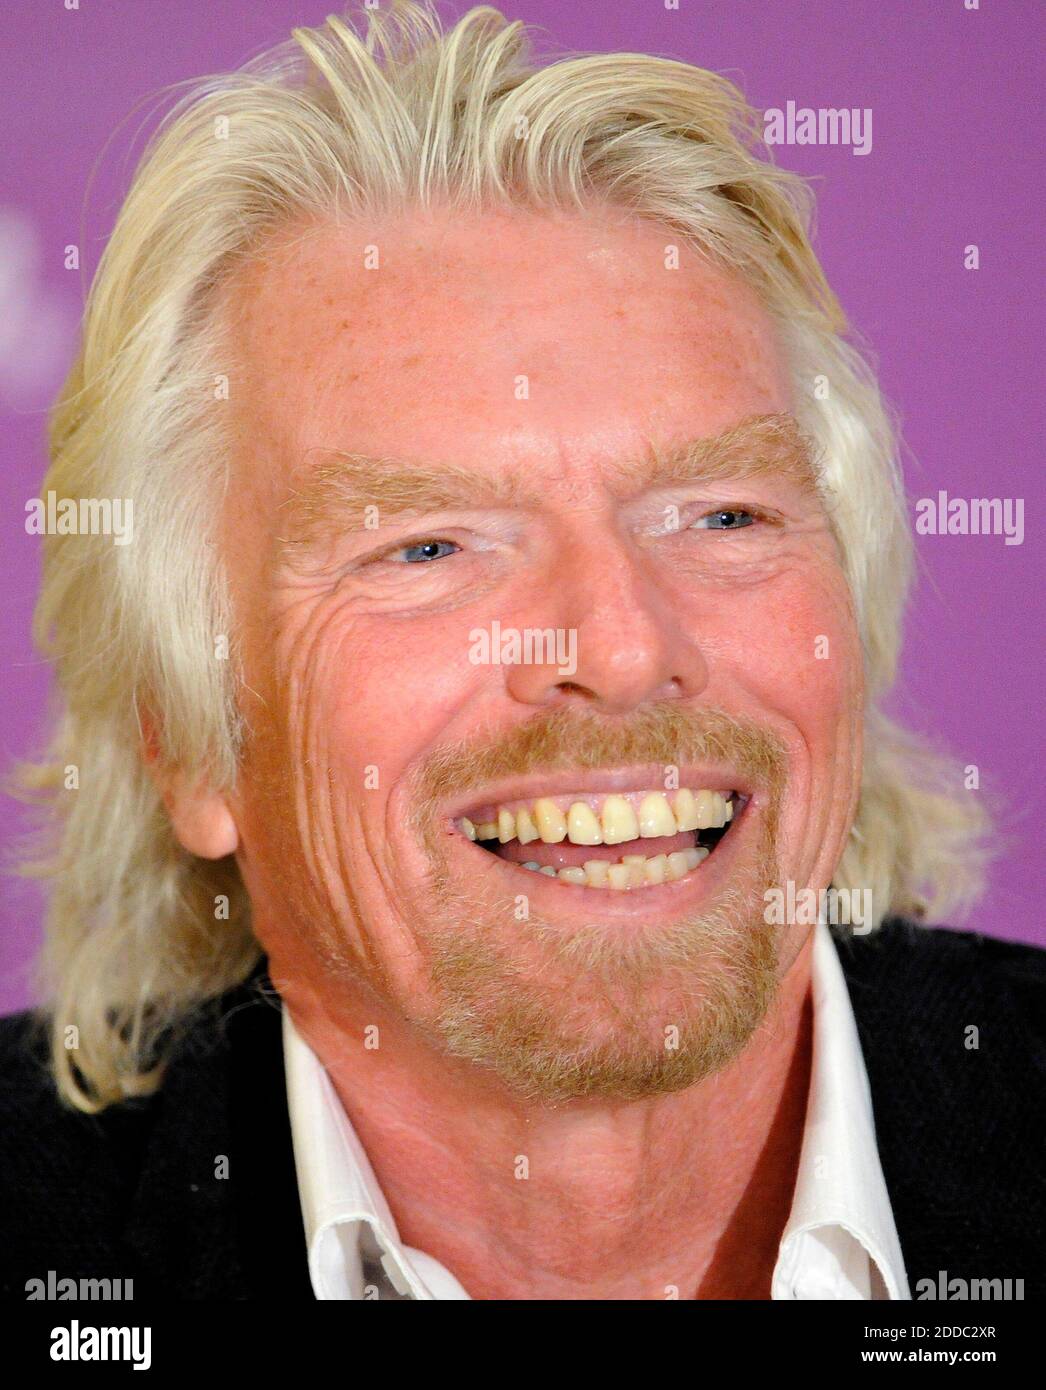 NO FILM, NO VIDEO, NO TV, NO DOCUMENTARY - Sir Richard Branson, founder of Virgin Group, attends a fundraiser supporting MD Anderson Cancer Center at Hilton Anatole in Dallas, TX, USA, Wednesday, January 4, 2012. The 22nd annual 'A Conversation With a Living Legend', benefiting the University of Texas MD Anderson Cancer Center, showcased Sir Richard Branson with an interview with broadcast journalist Miles O'Brien. Photo by Max Faulkner/Fort Worth Star-Telegram/MCT/ABACAPRESS.COM Stock Photo